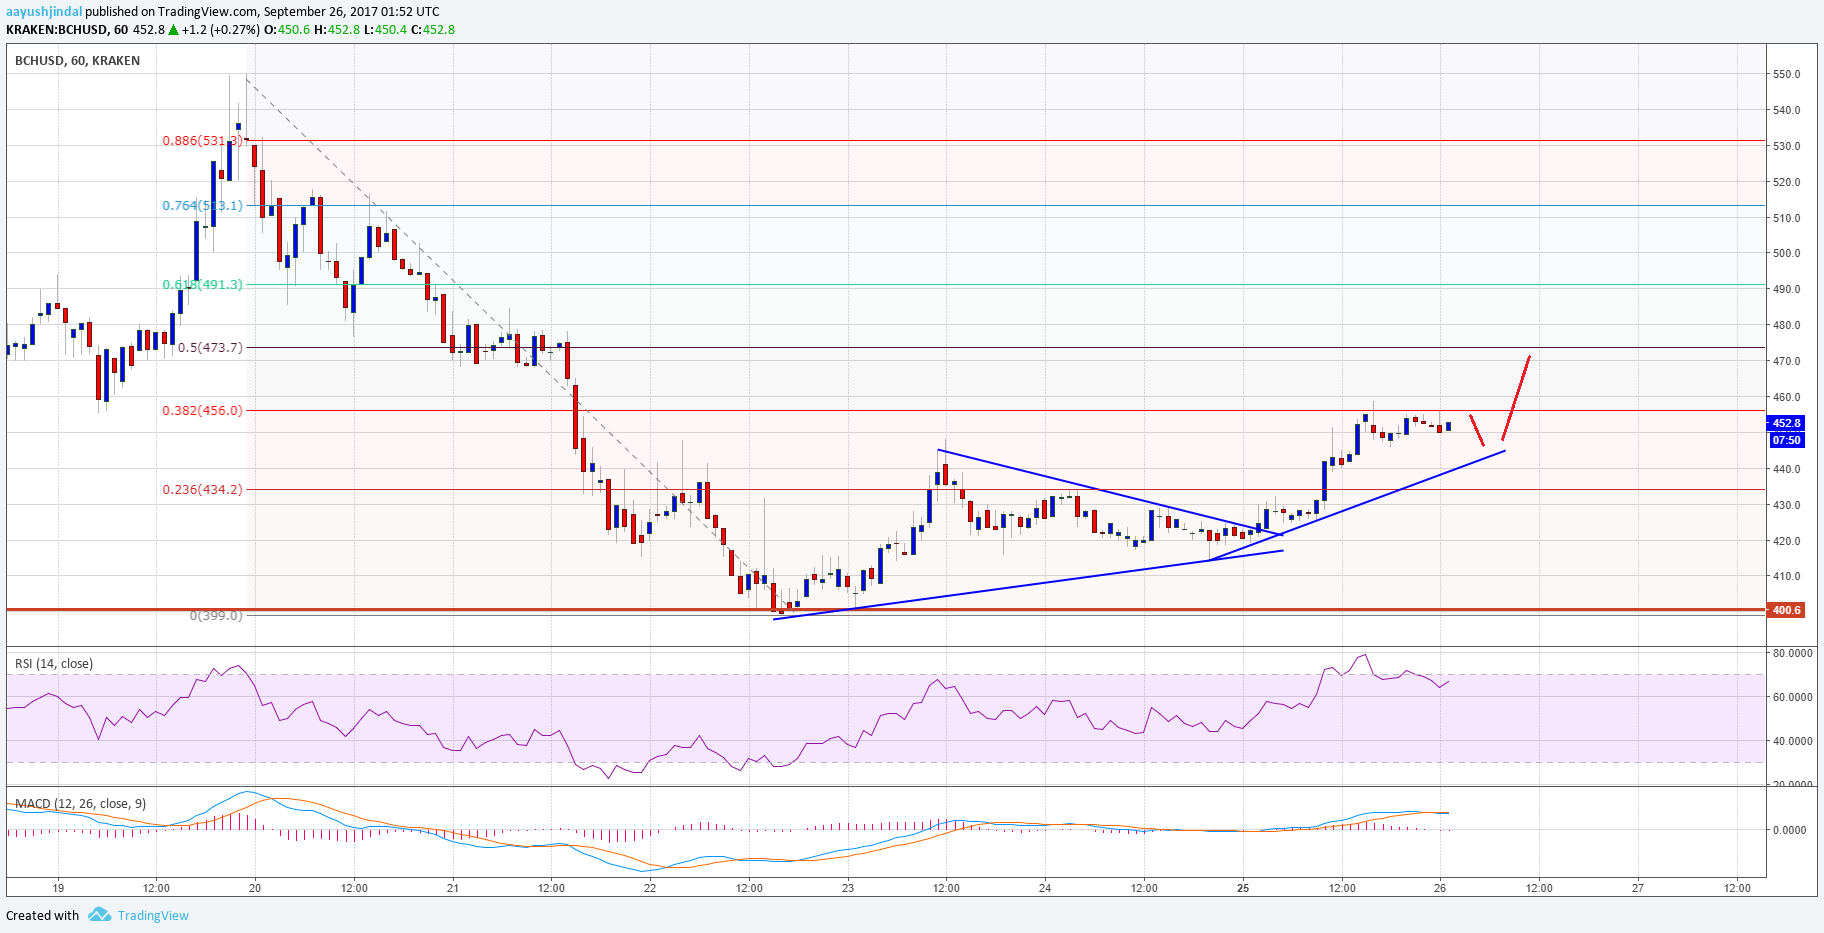 Bitcoin Cash Price Technical Analysis – BCH/USD To Retest $480?